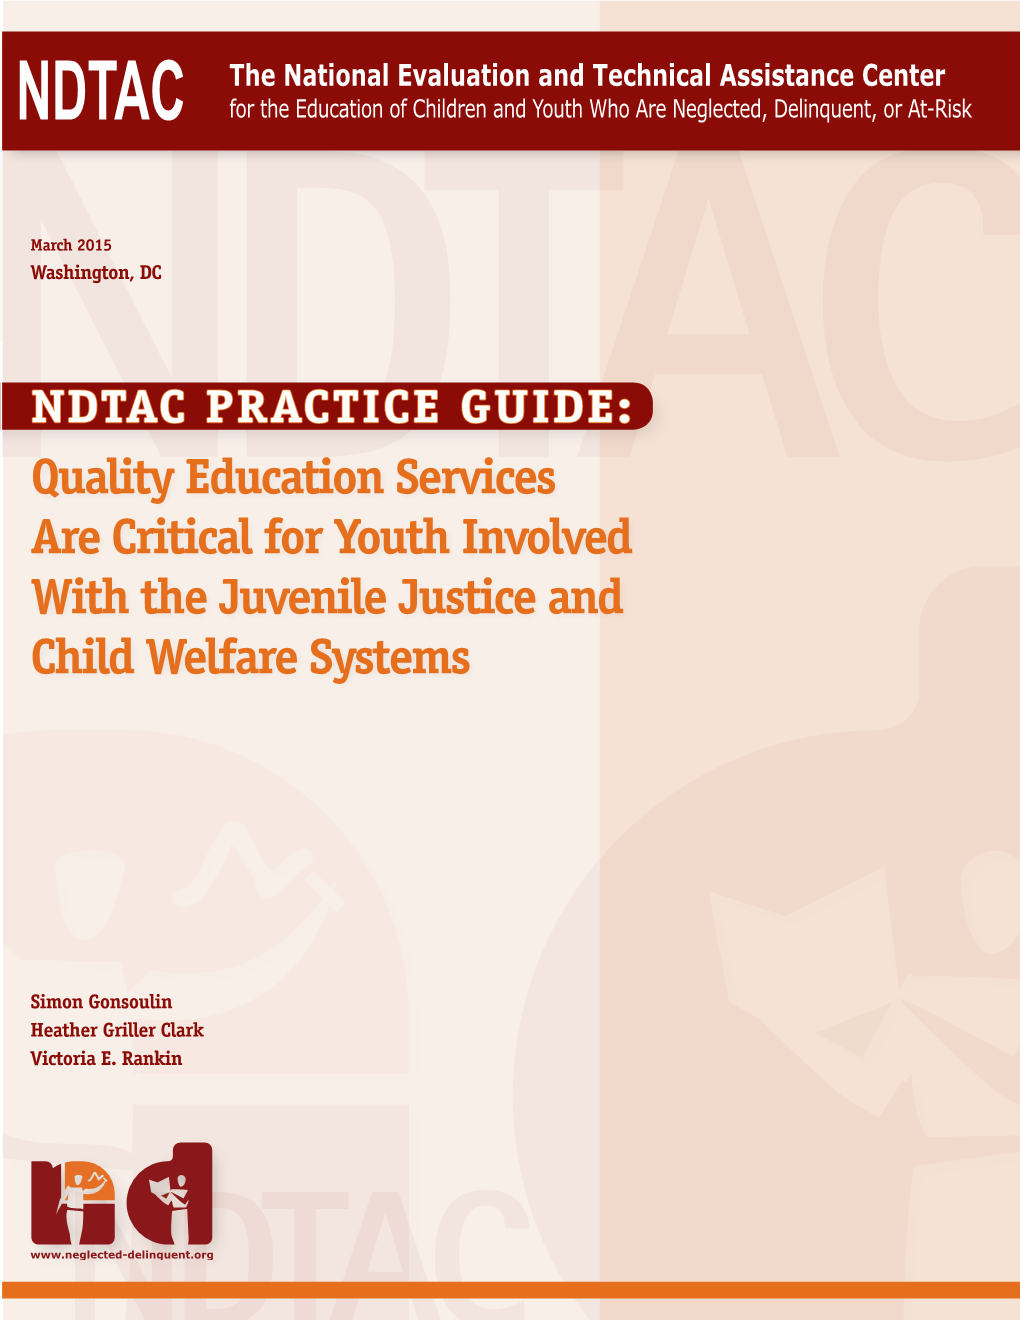 NDTAC PRACTICE GUIDE: Quality Education Services Are Critical for Youth Involved with the Juvenile Justice and Child Welfare Systems